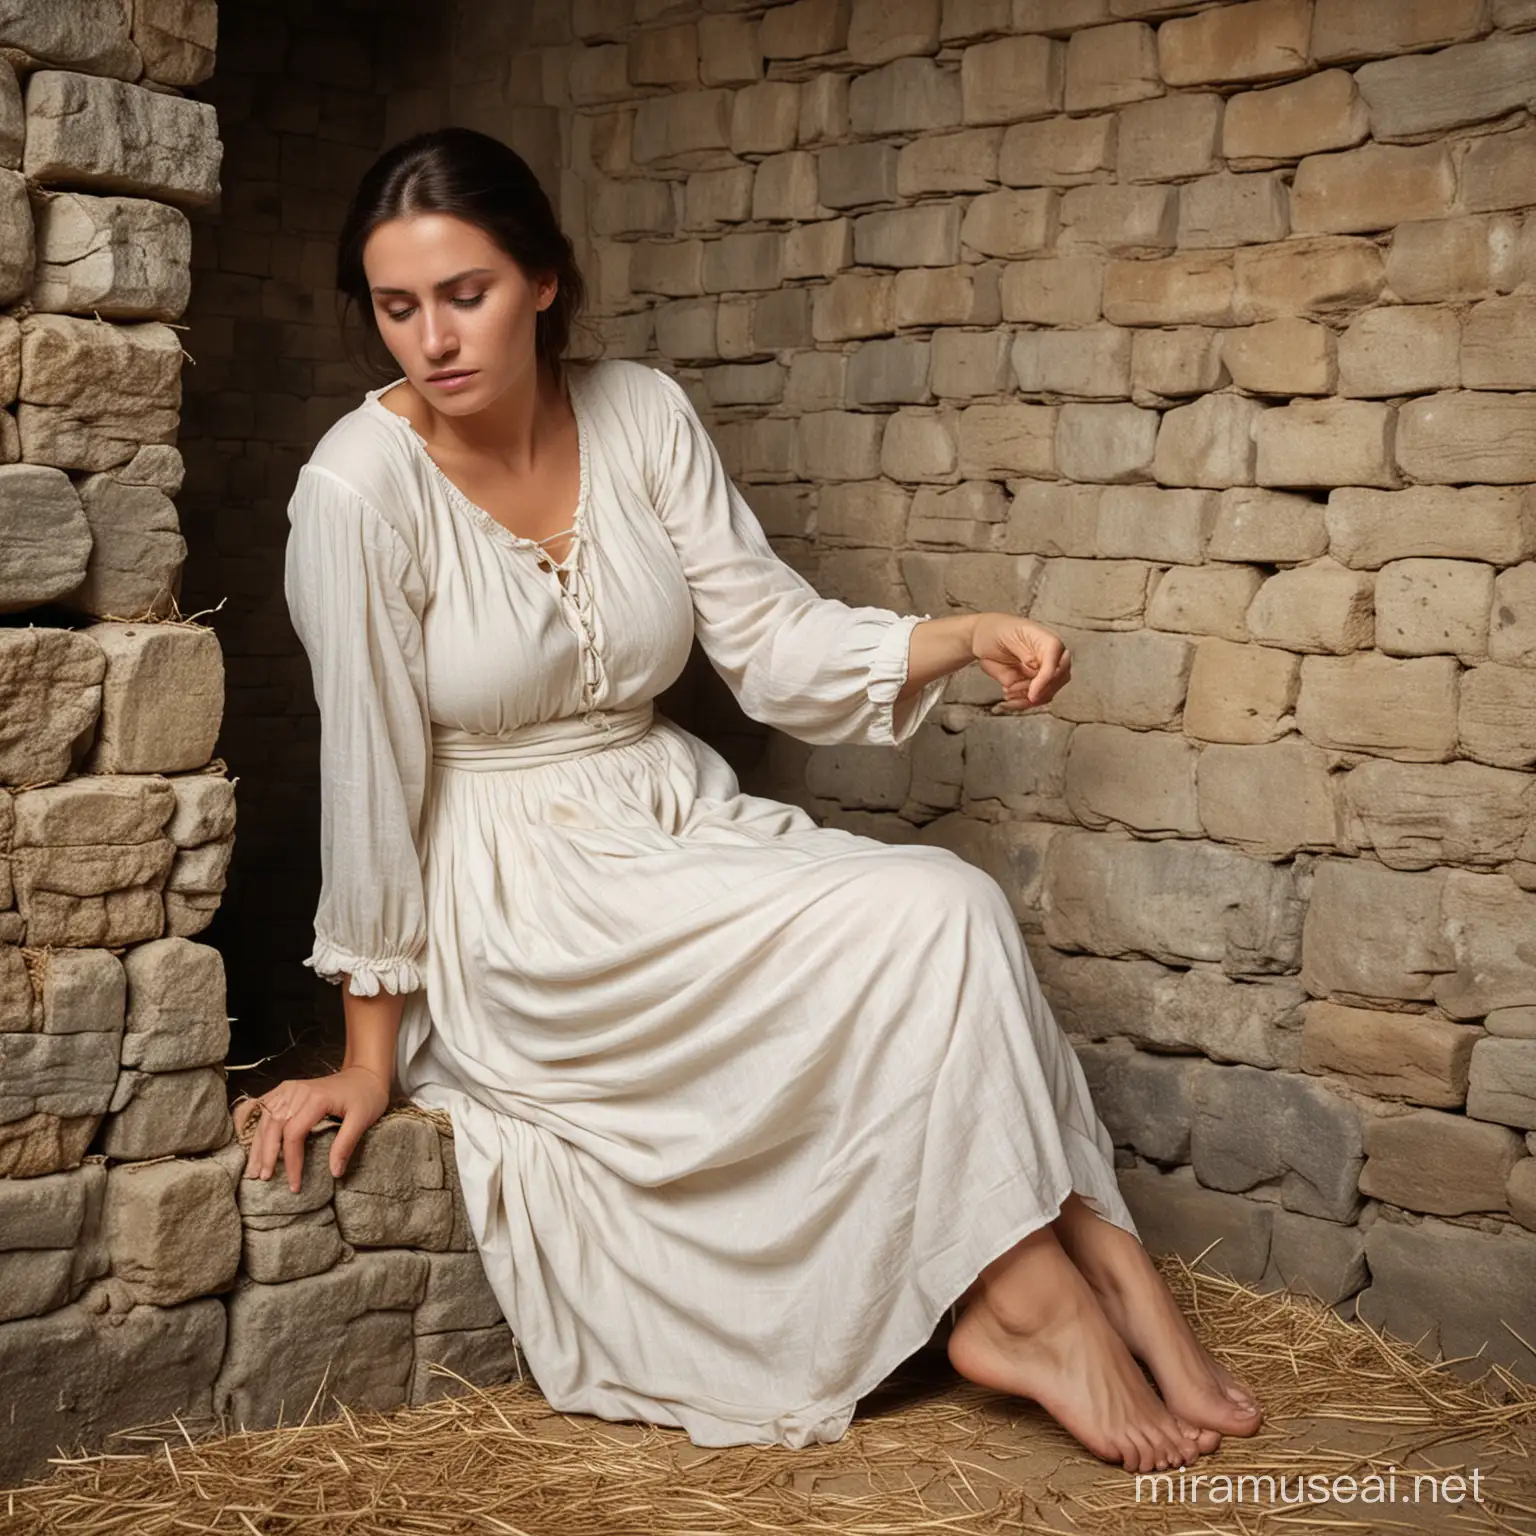 Desperate Peasant Woman in Dungeon Cell